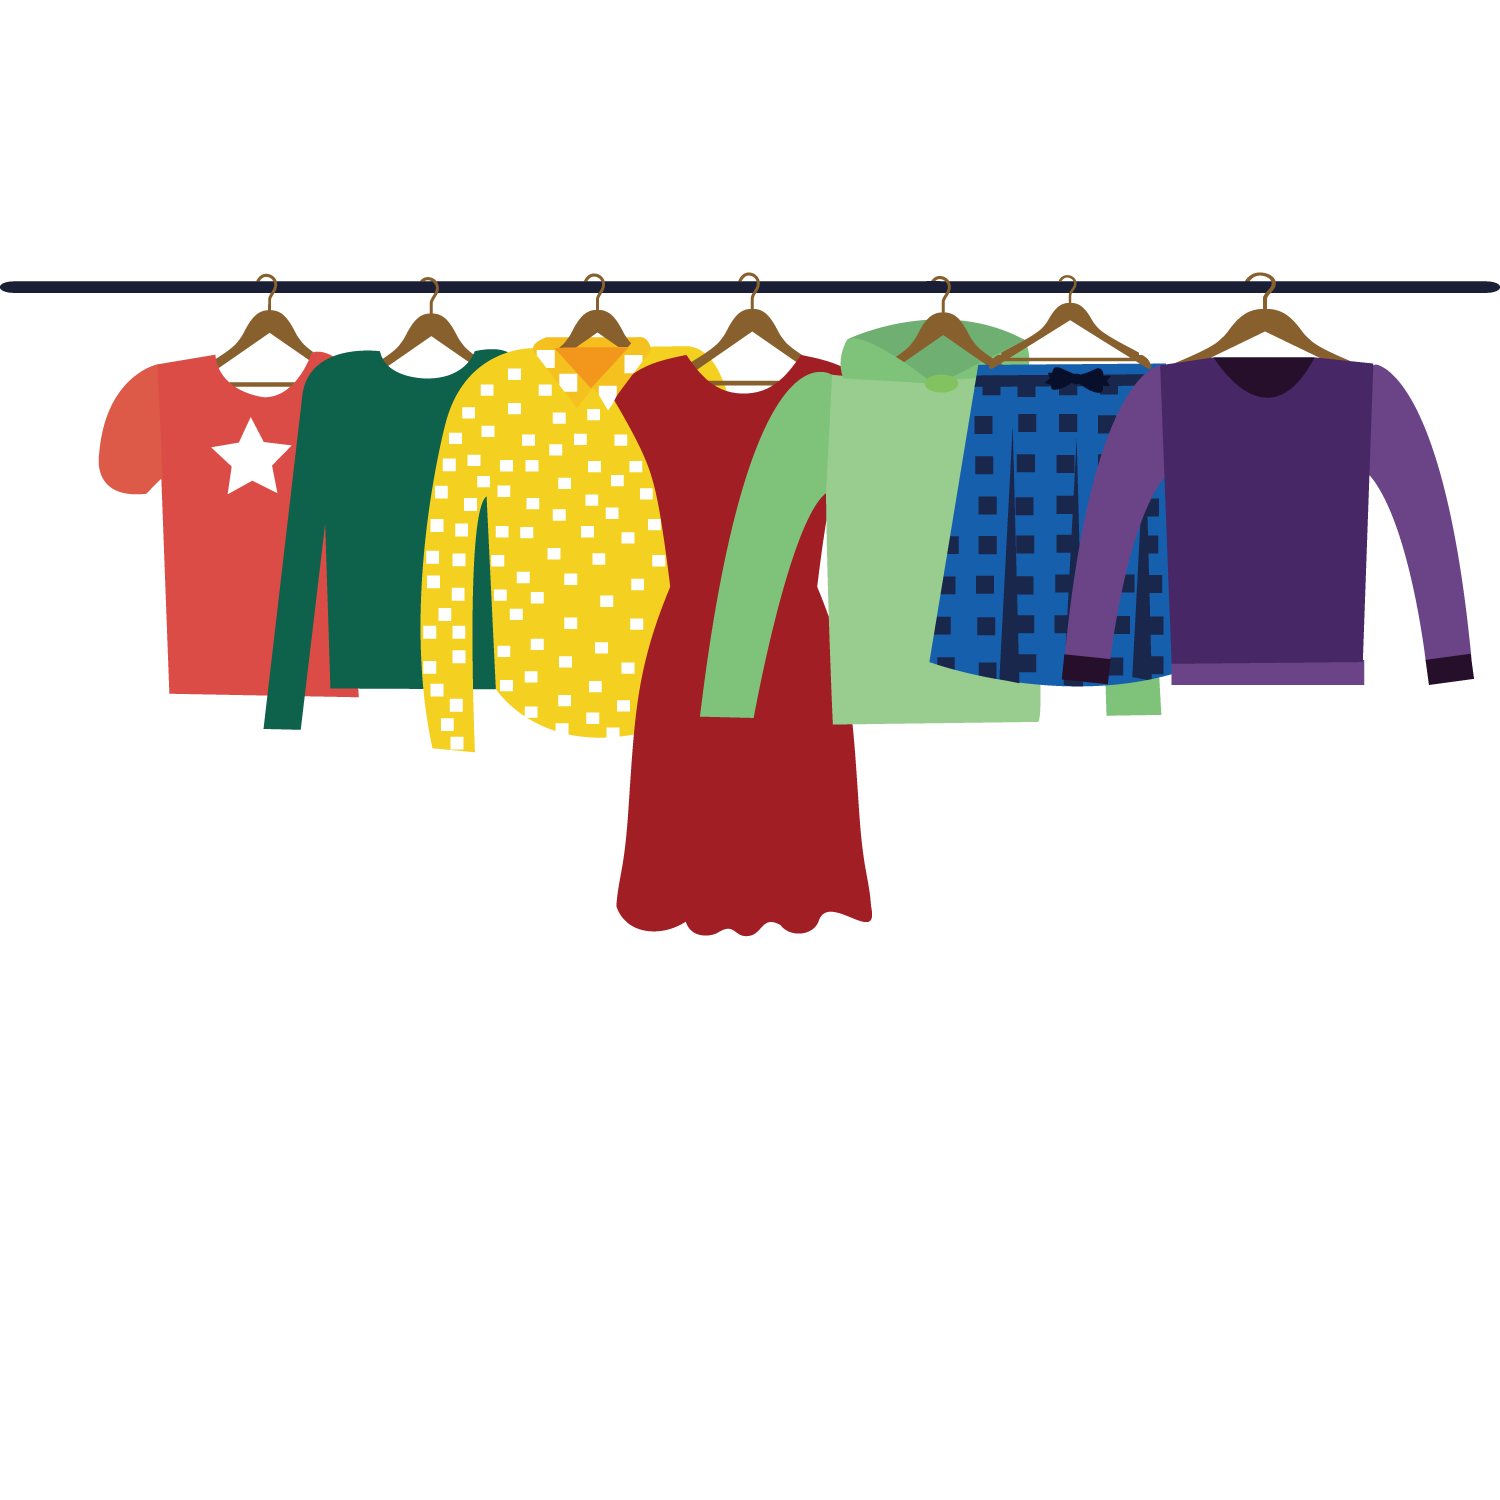 Adobe Clothes Clothing Illustrator Women'S Free Download Image Clipart